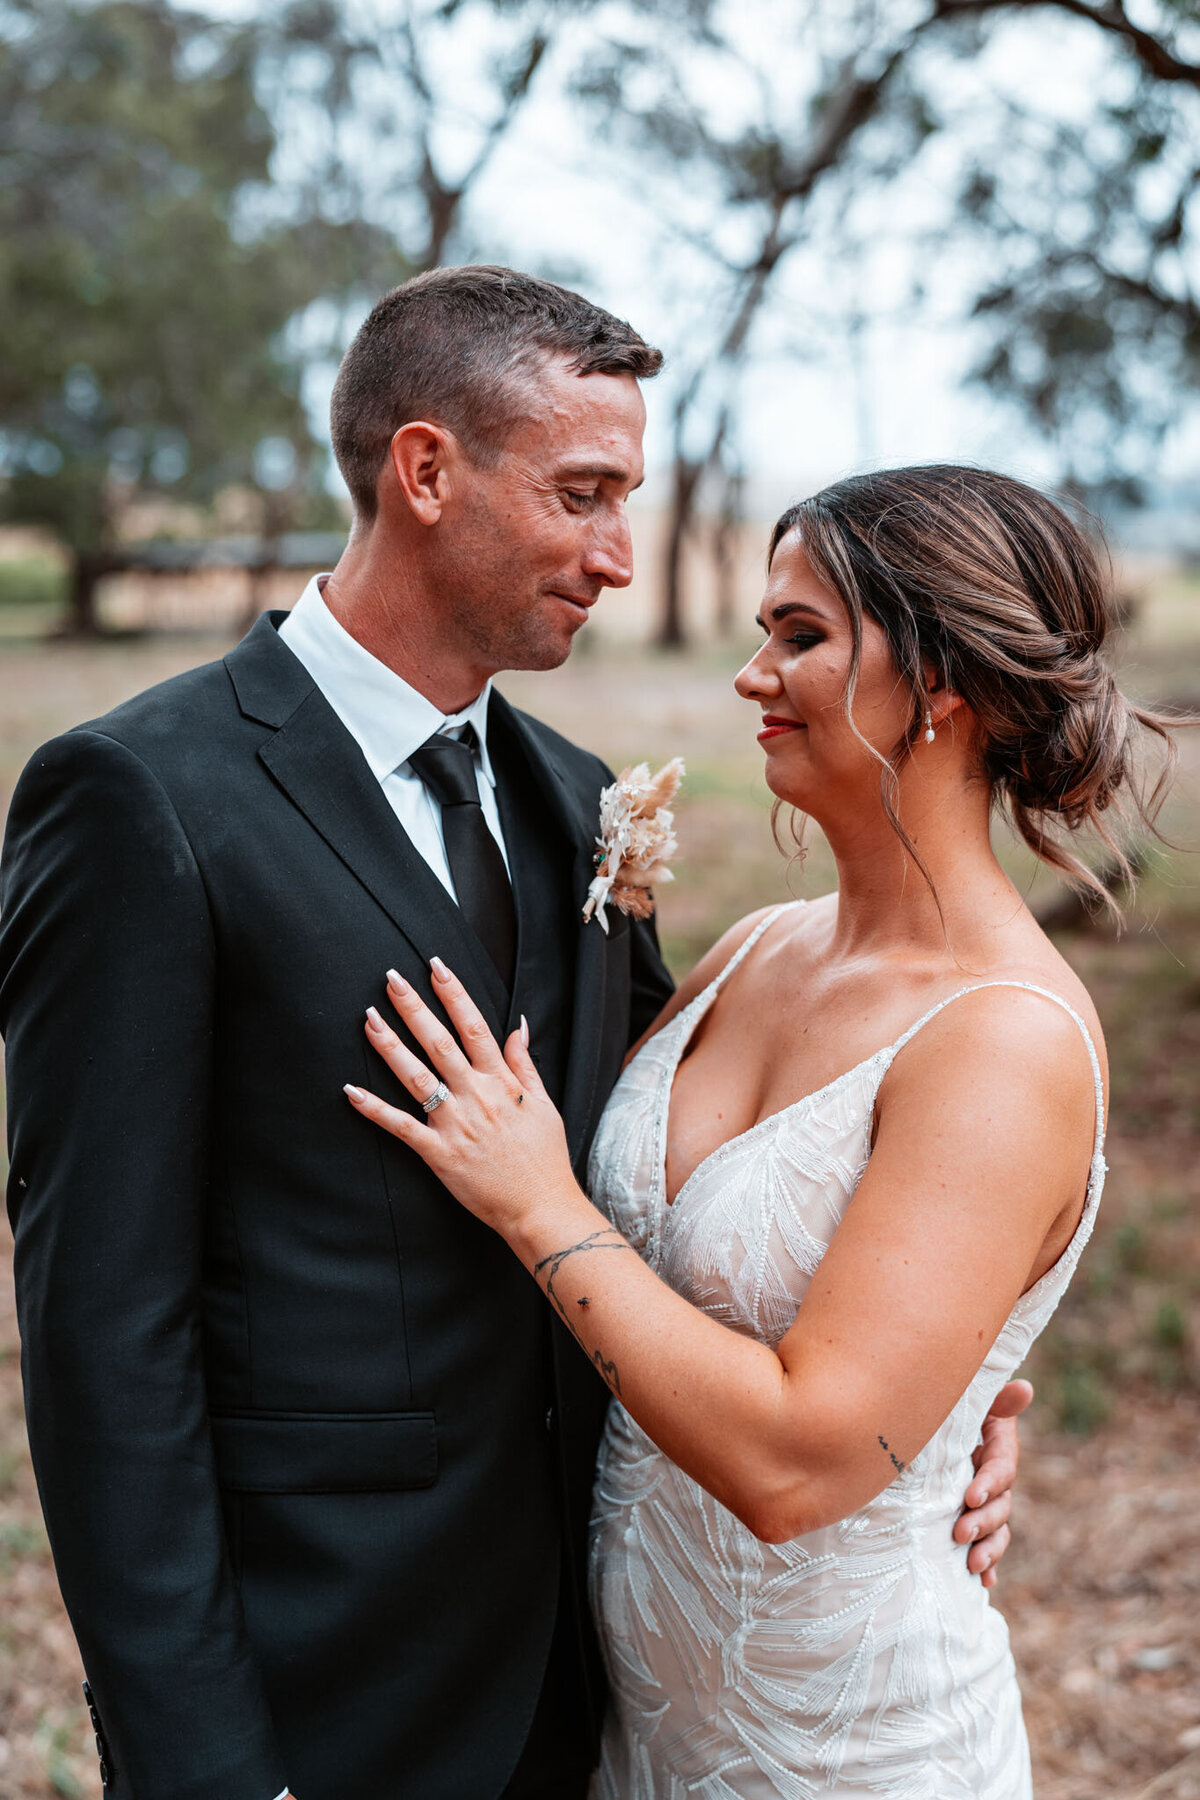 Mikaeley & Lachlan's after wedding photoshoot!